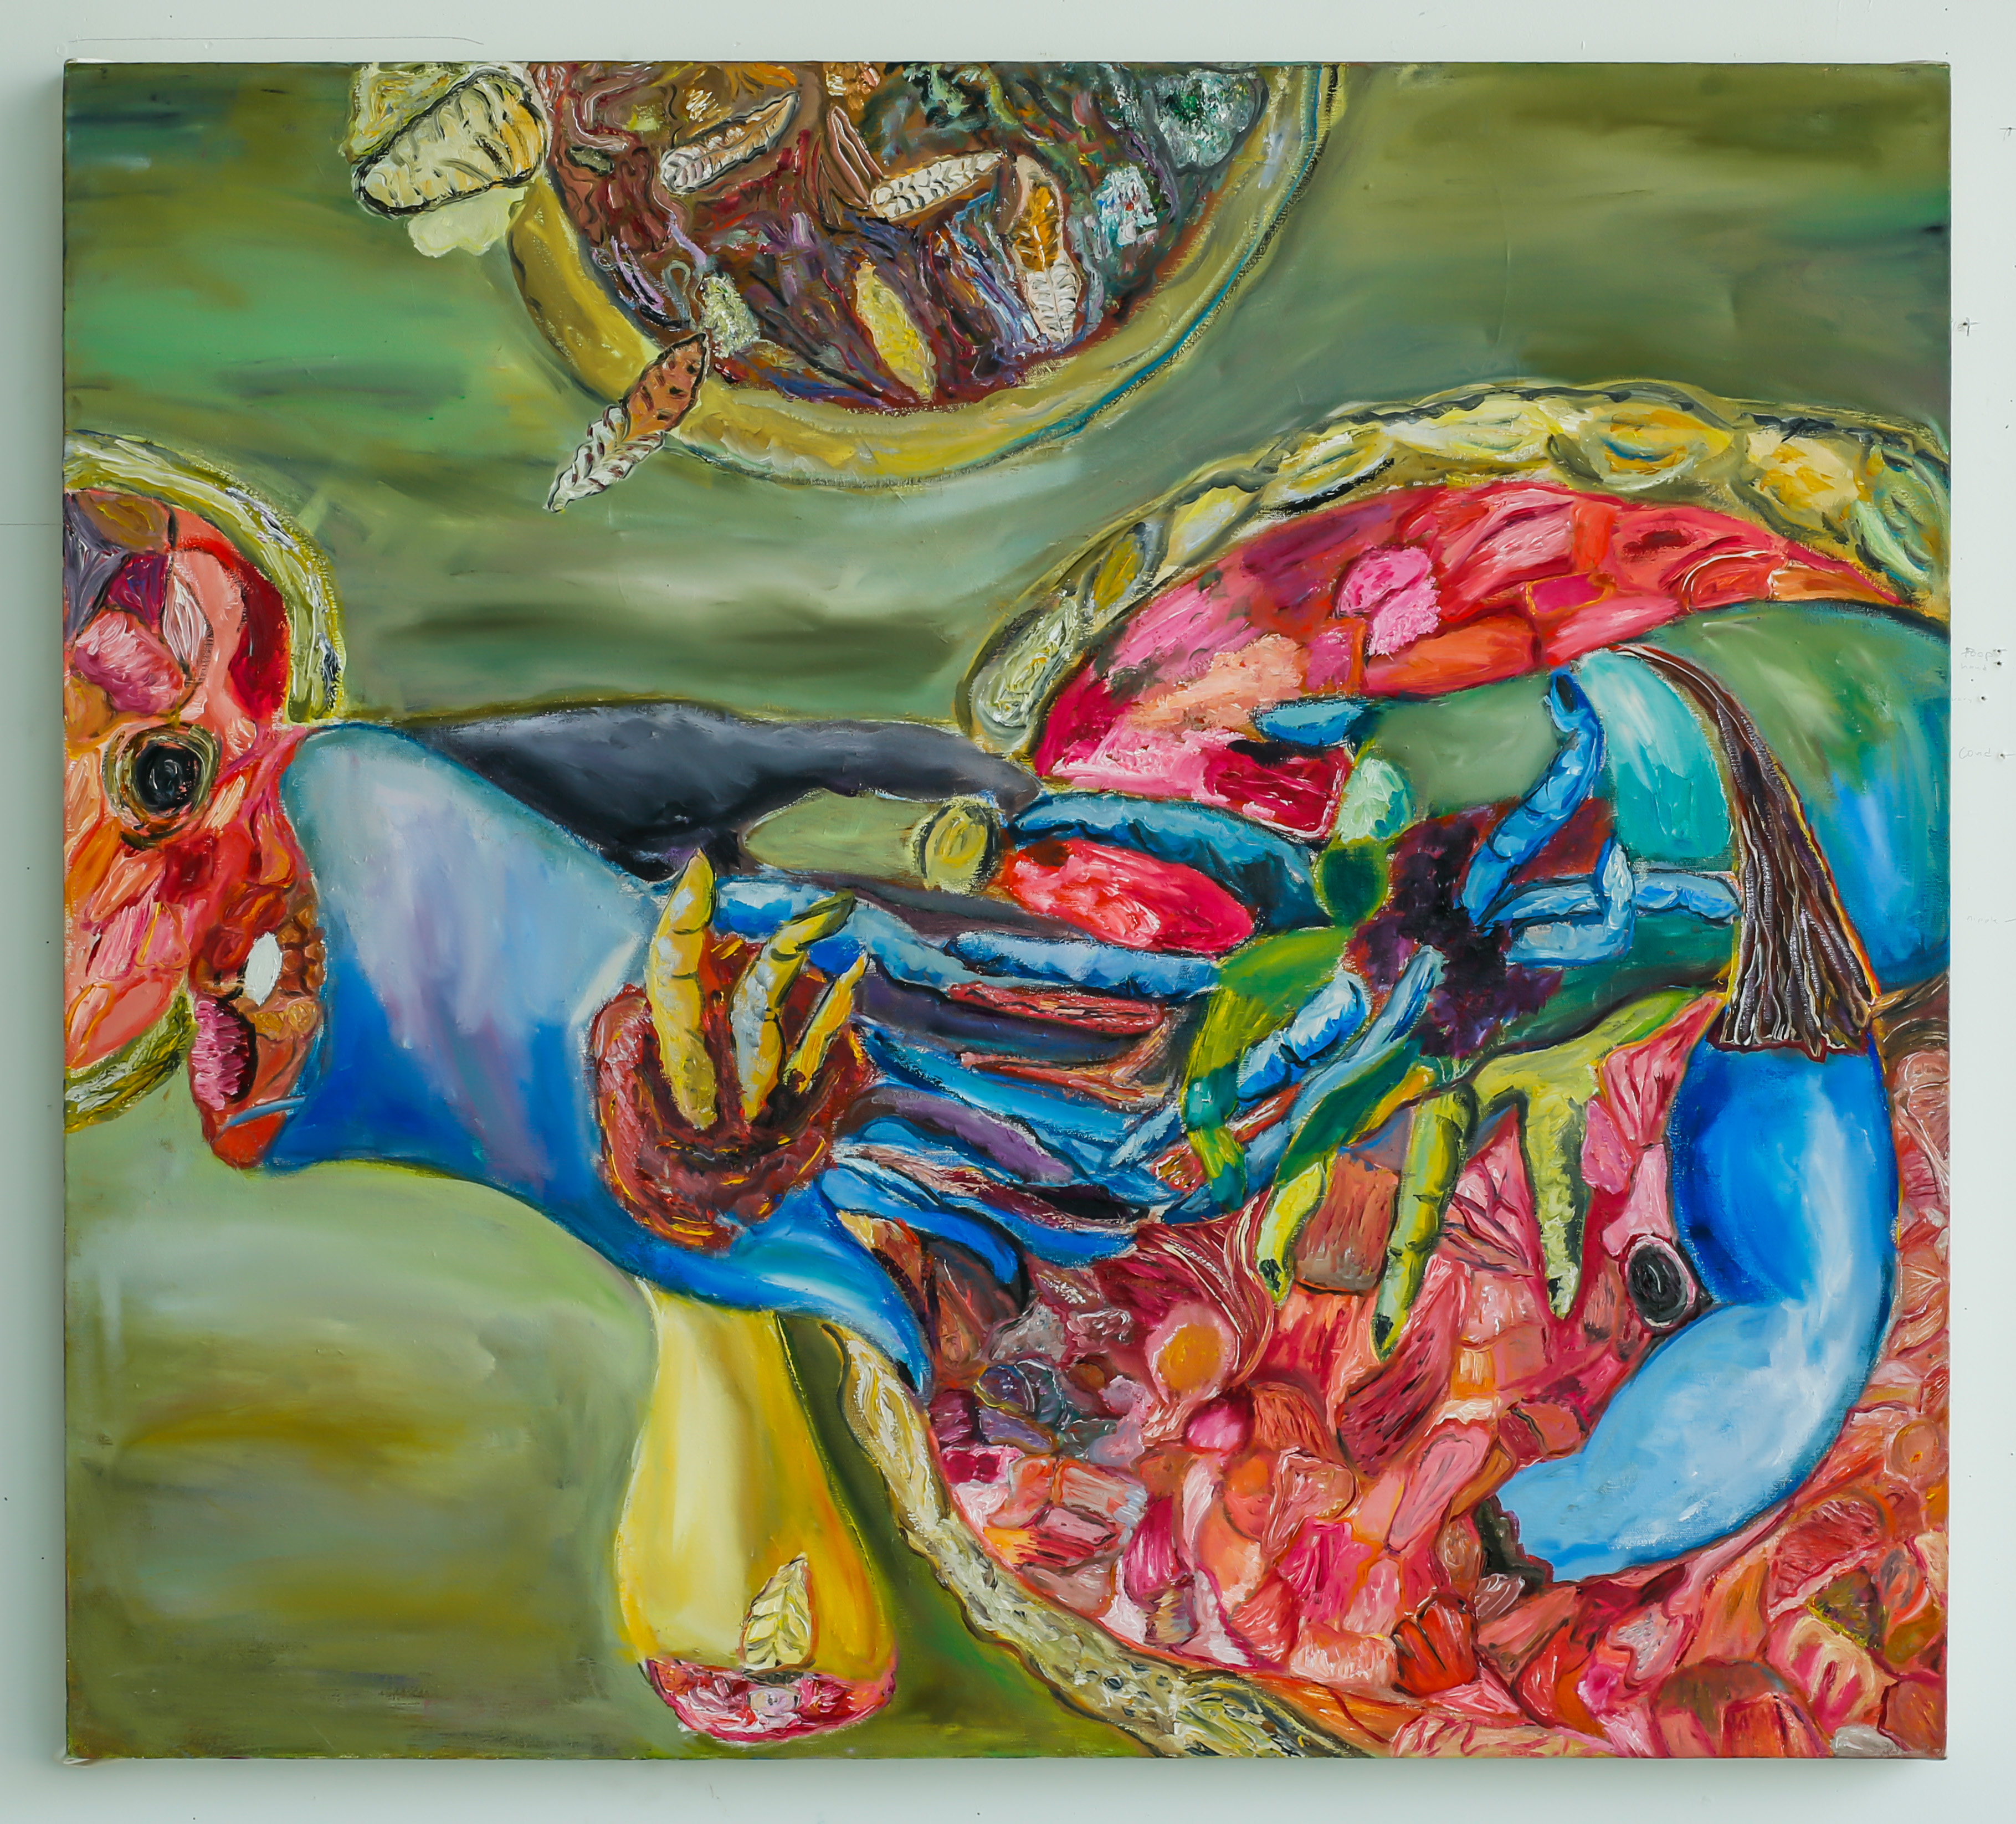 <i>Meat Pie Hands</i><br>Oil on canvas, 36 x 36.36 in, 2021.